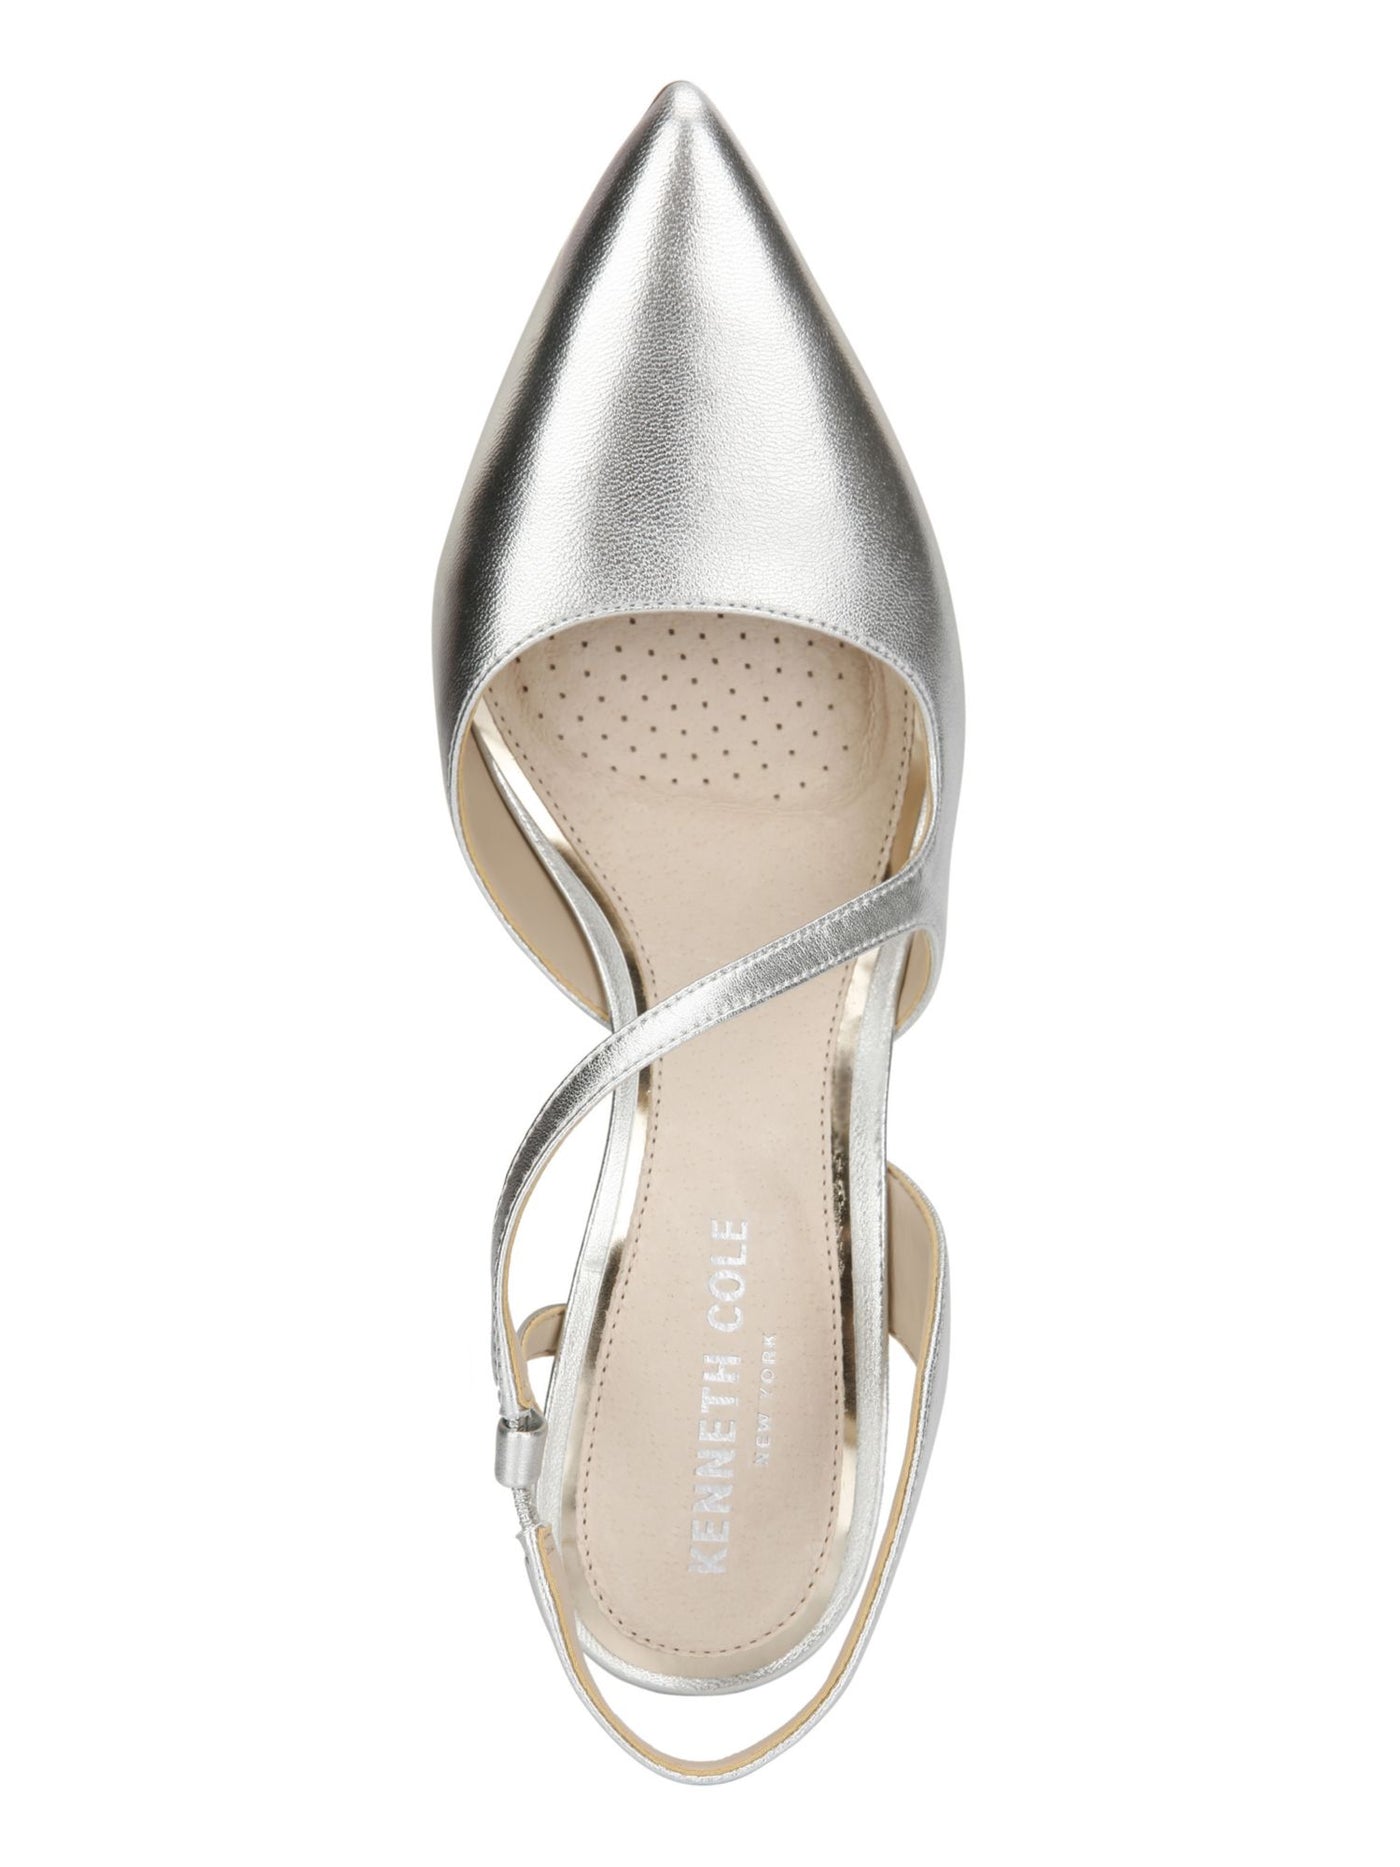 KENNETH COLE NEW YORK Womens Silver Padded Comfort Riley 85 Pointed Toe Stiletto Slip On Leather Slingback 7.5 M